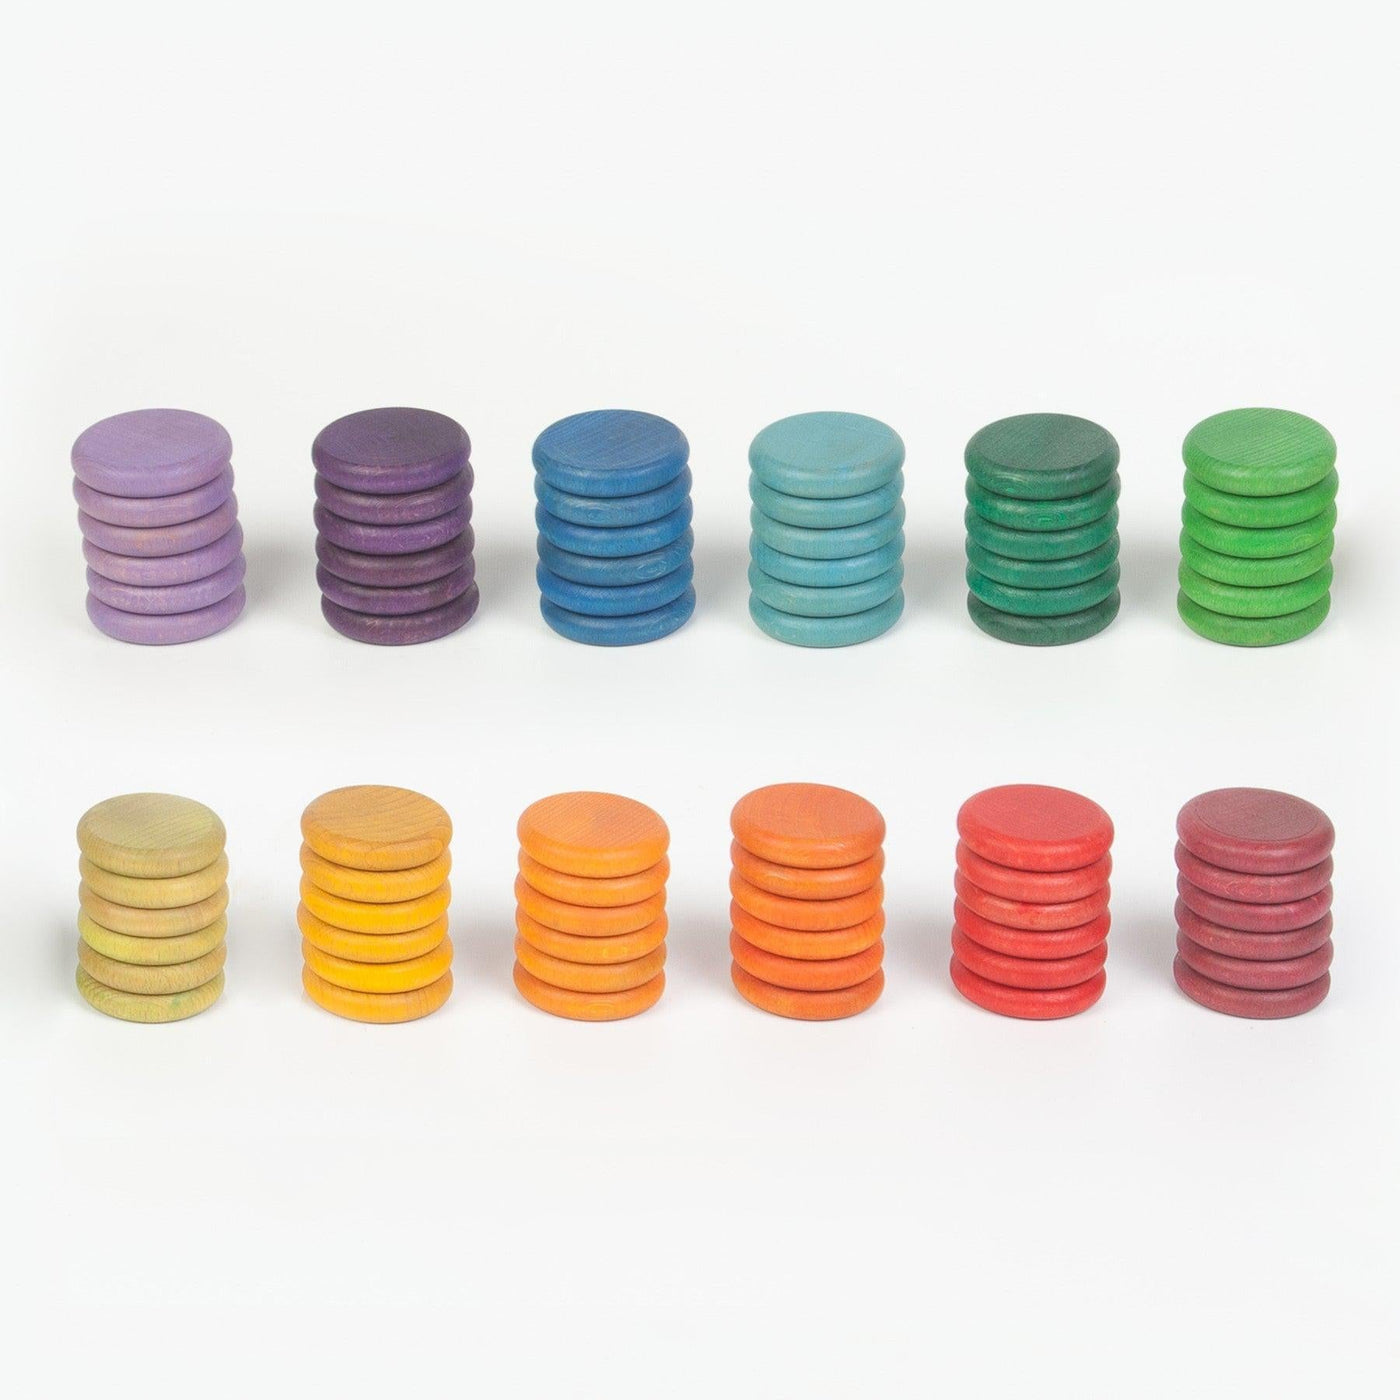 72 Grapat Rainbow Coins in 12 Colours